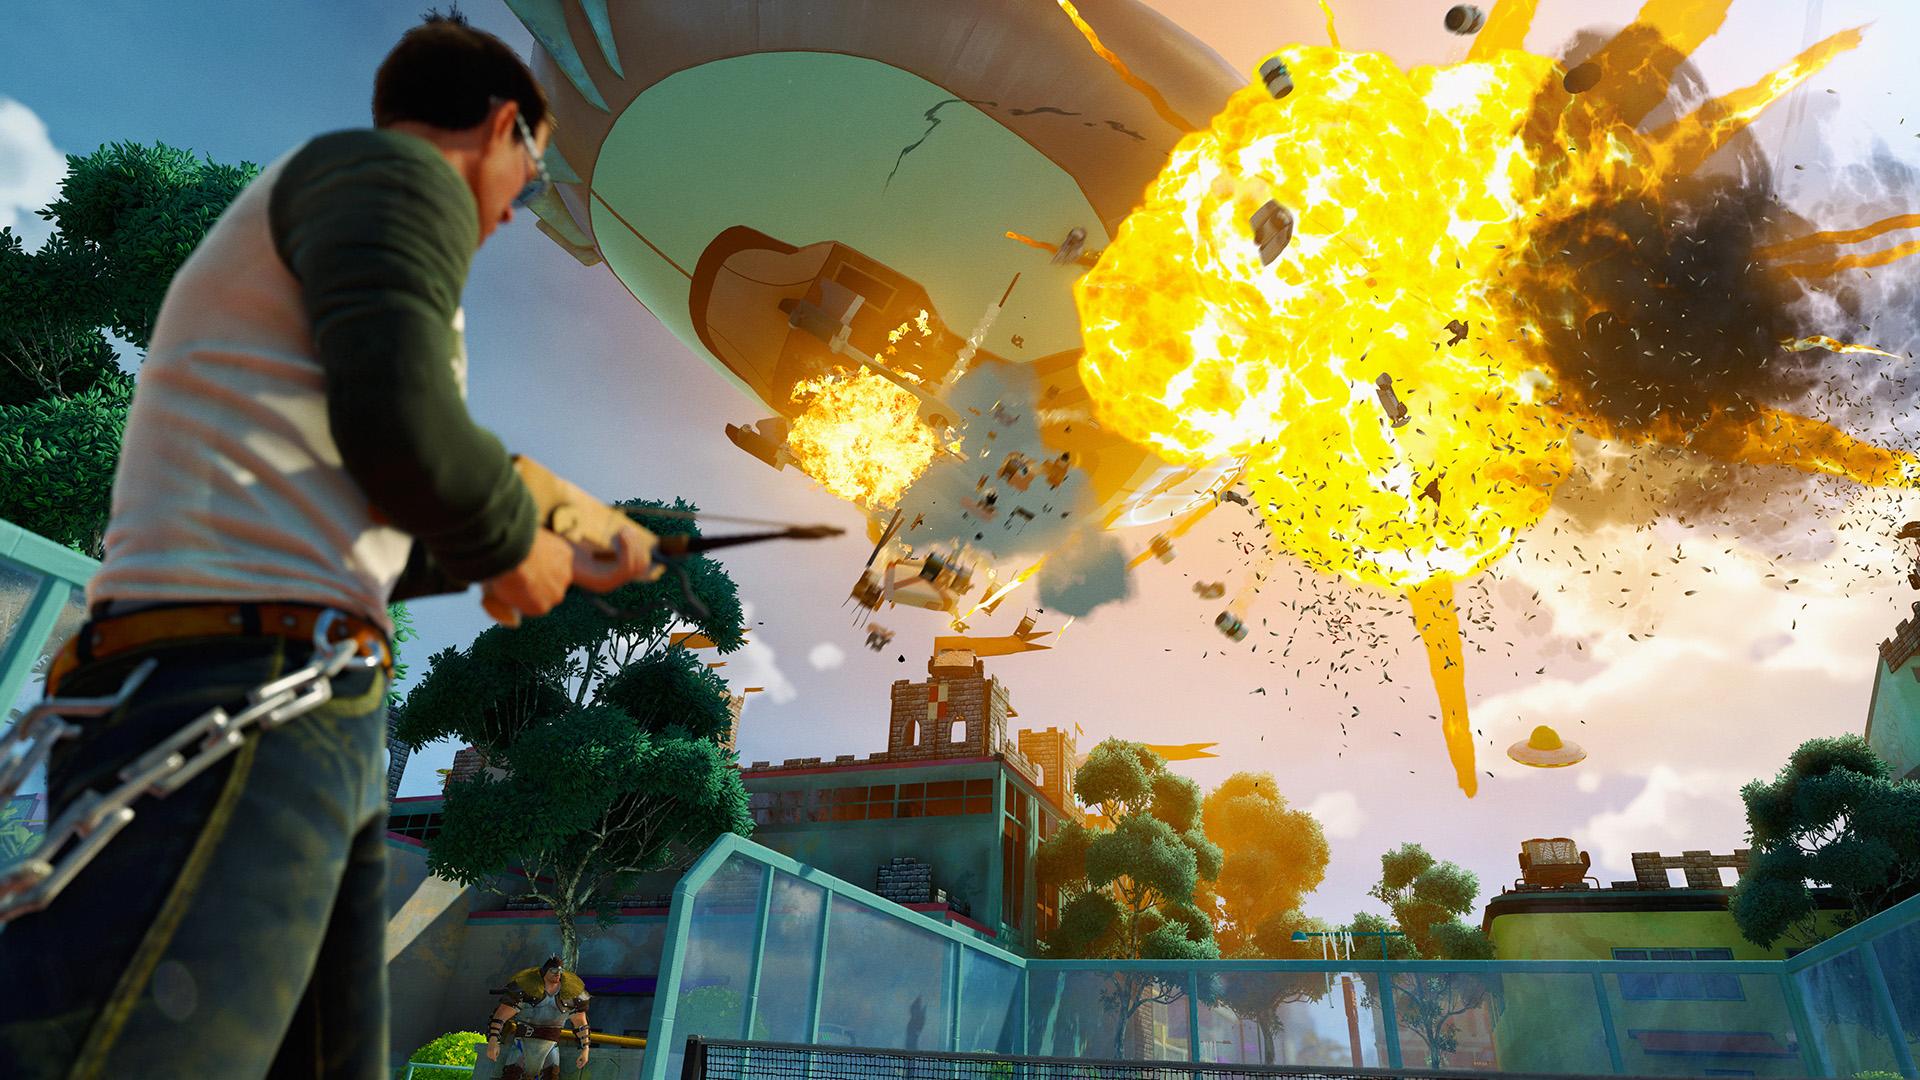 What The Hell Happened To Sunset Overdrive? 